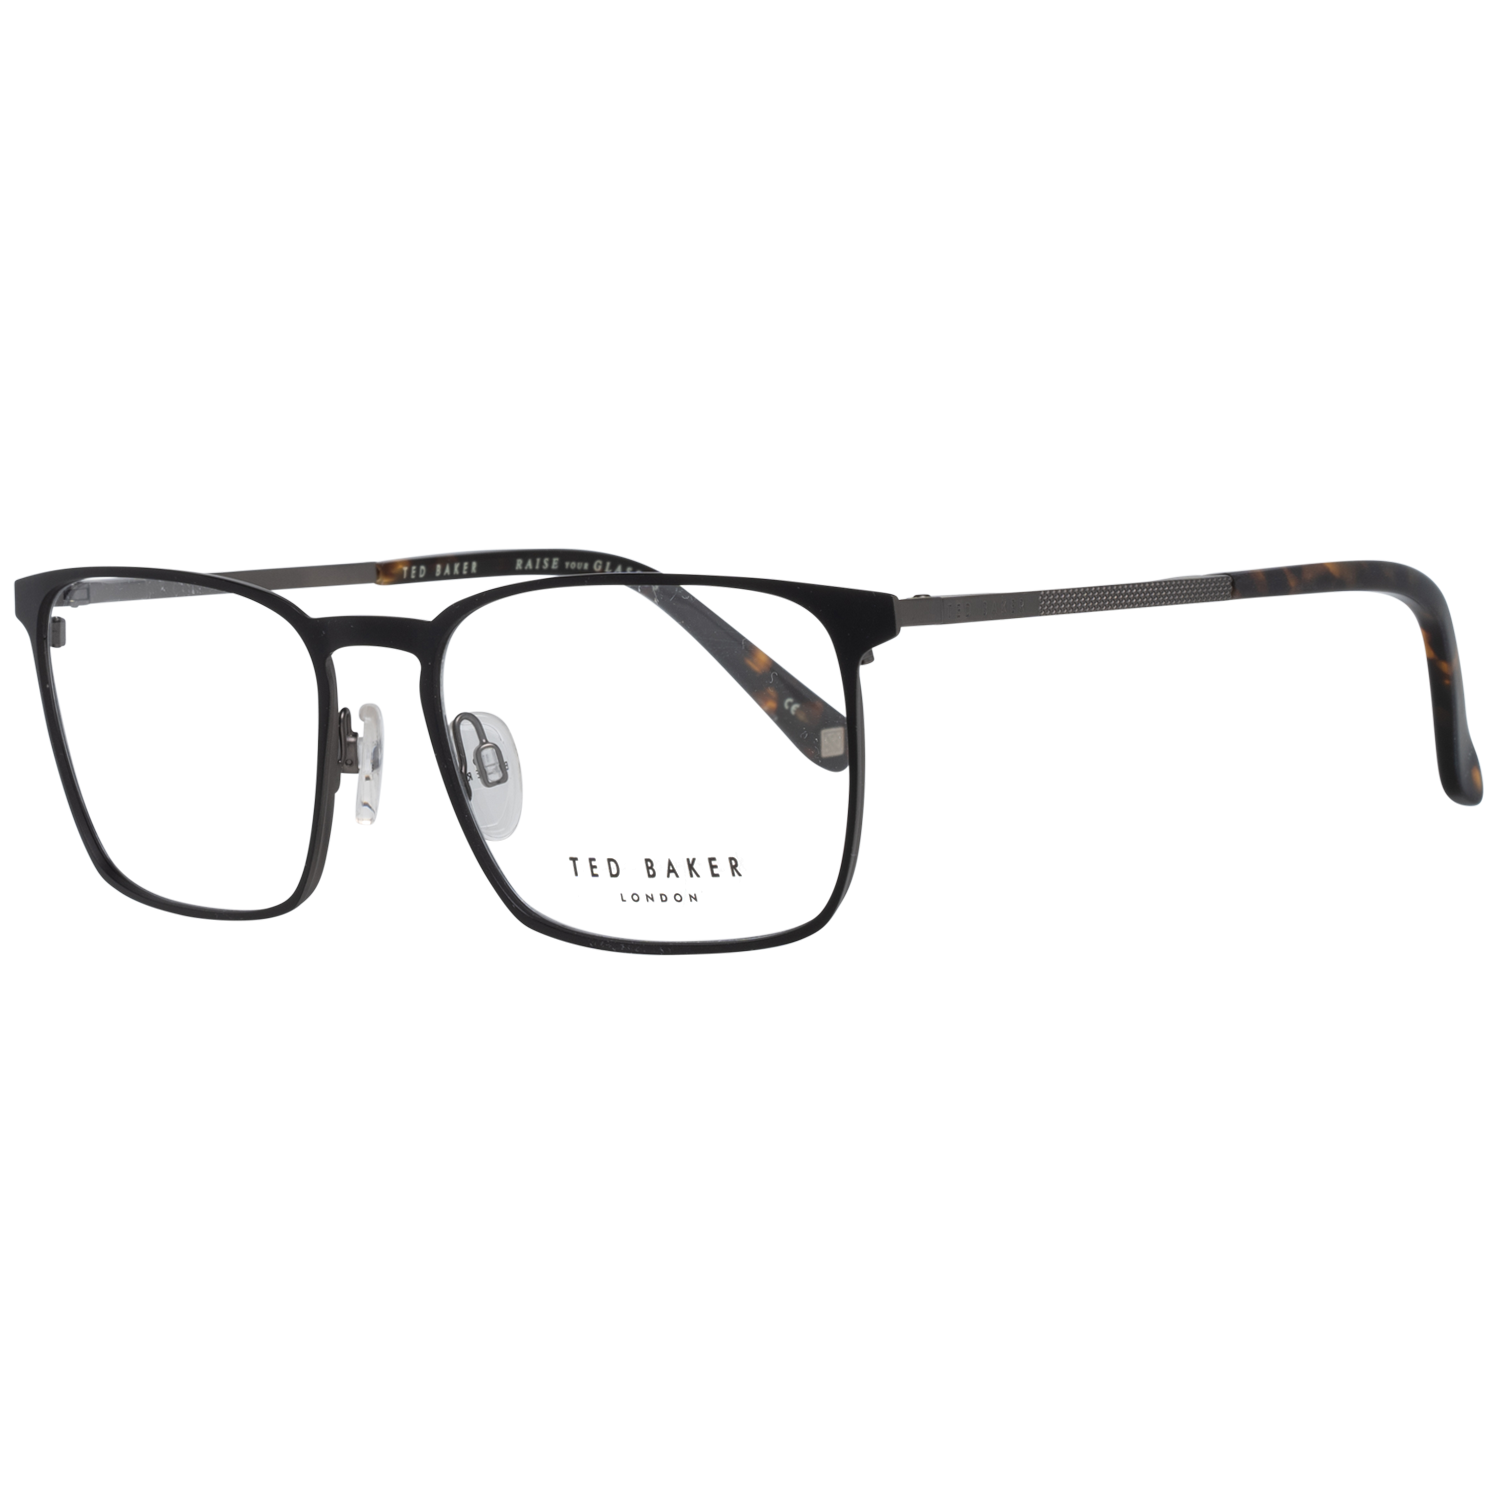 GenderMenMain colorBlackFrame colorBlackFrame materialMetalSize53-17-145Lenses width53mmLenses heigth40mmBridge length17mmFrame width135mmTemple length145mmShipment includesCase, Cleaning clothStyleFull-RimSpring hingeYes